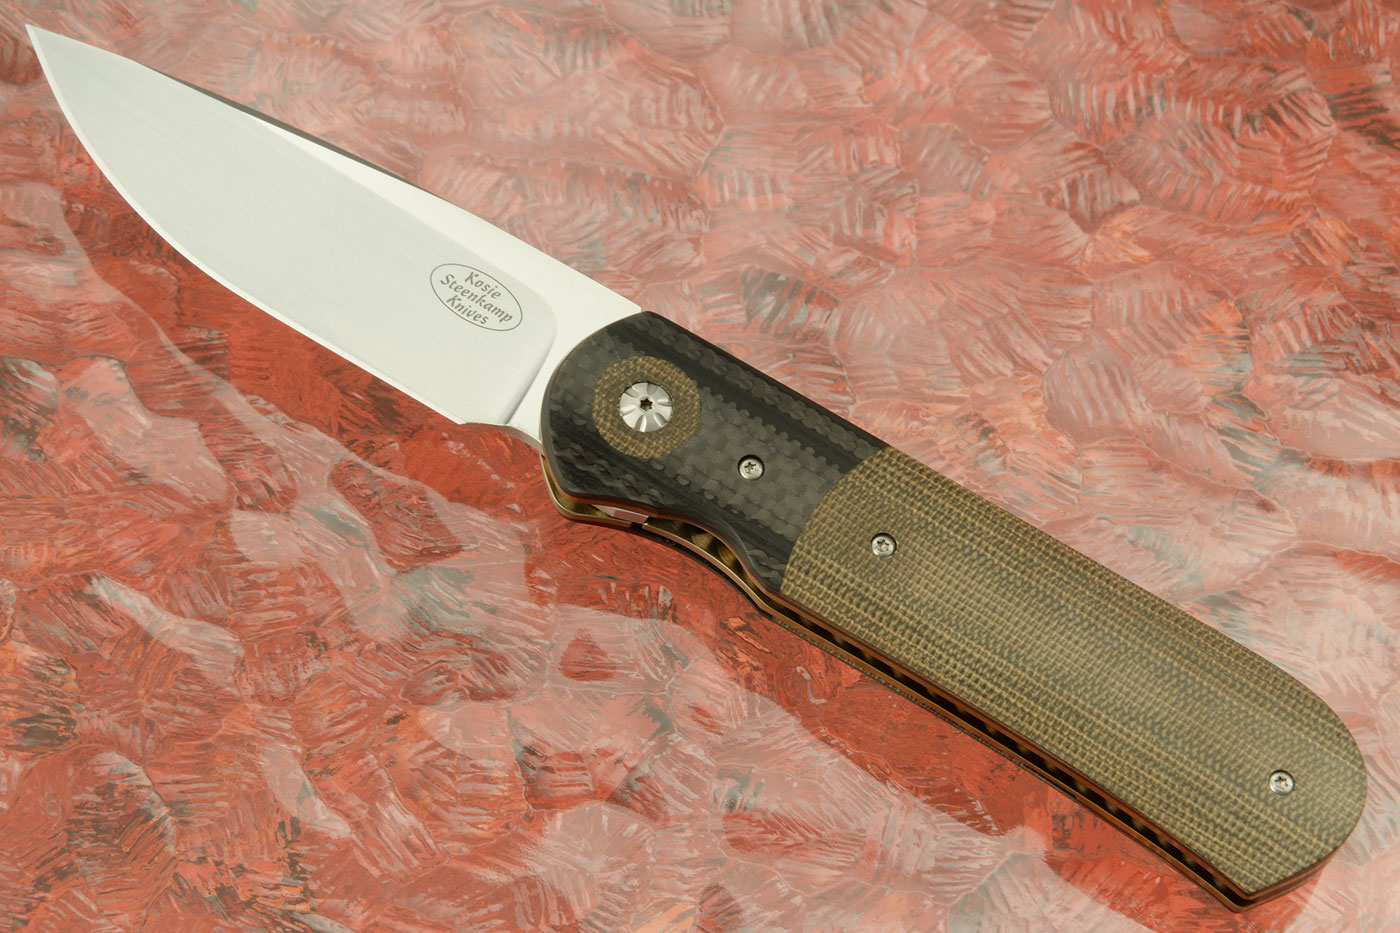 Samson Front Flipper with Green Micarta and Stacked Carbon Fiber/G10 (IKBS)